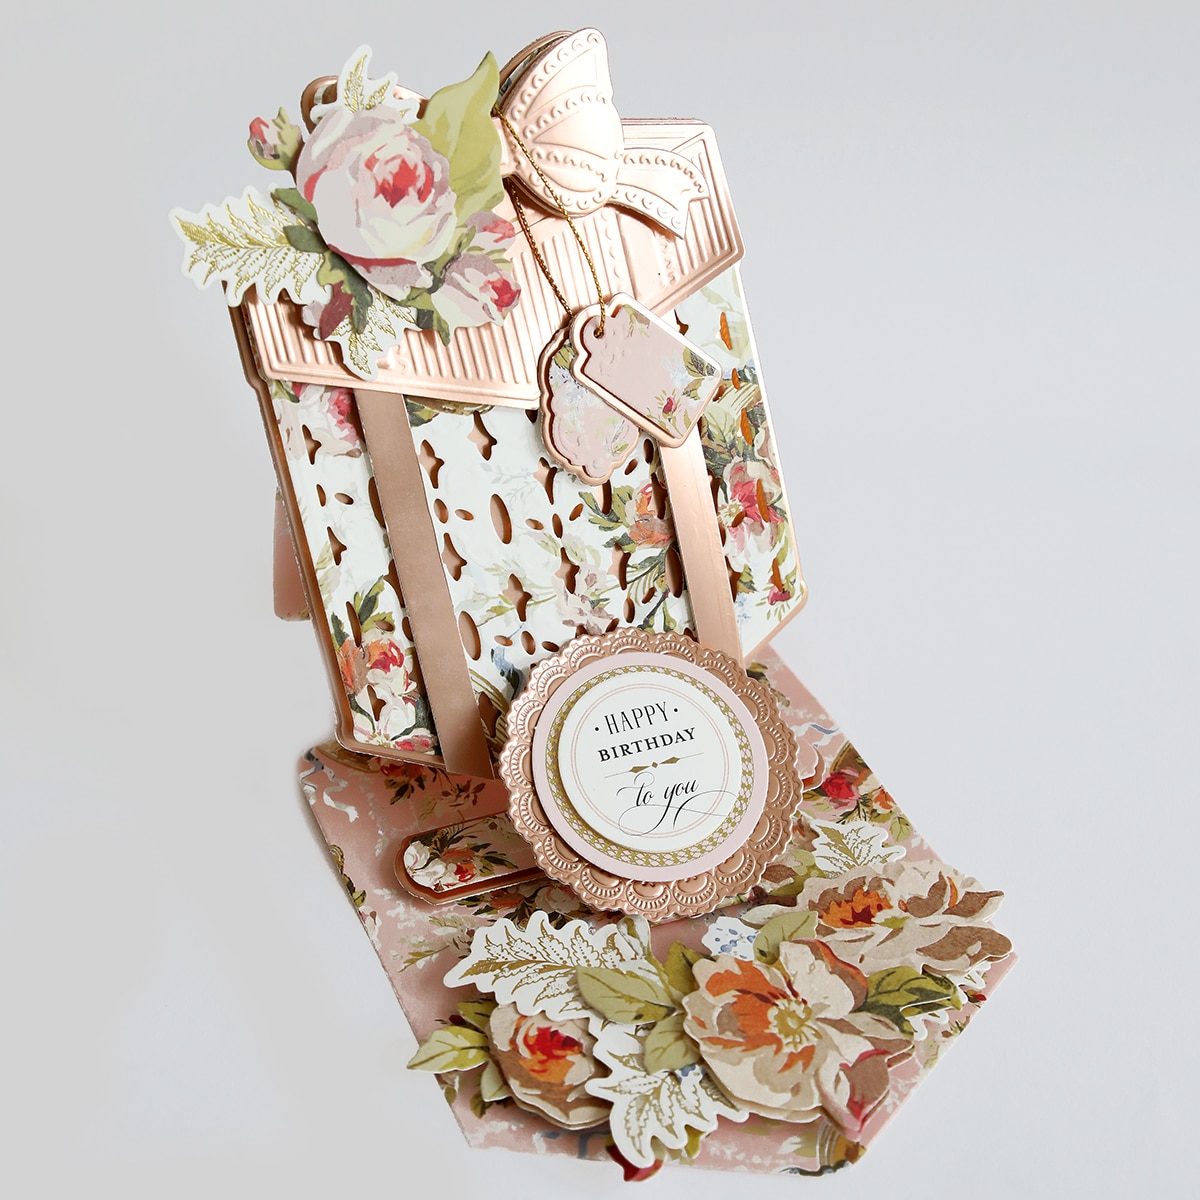 A card with flowers and a gift box.